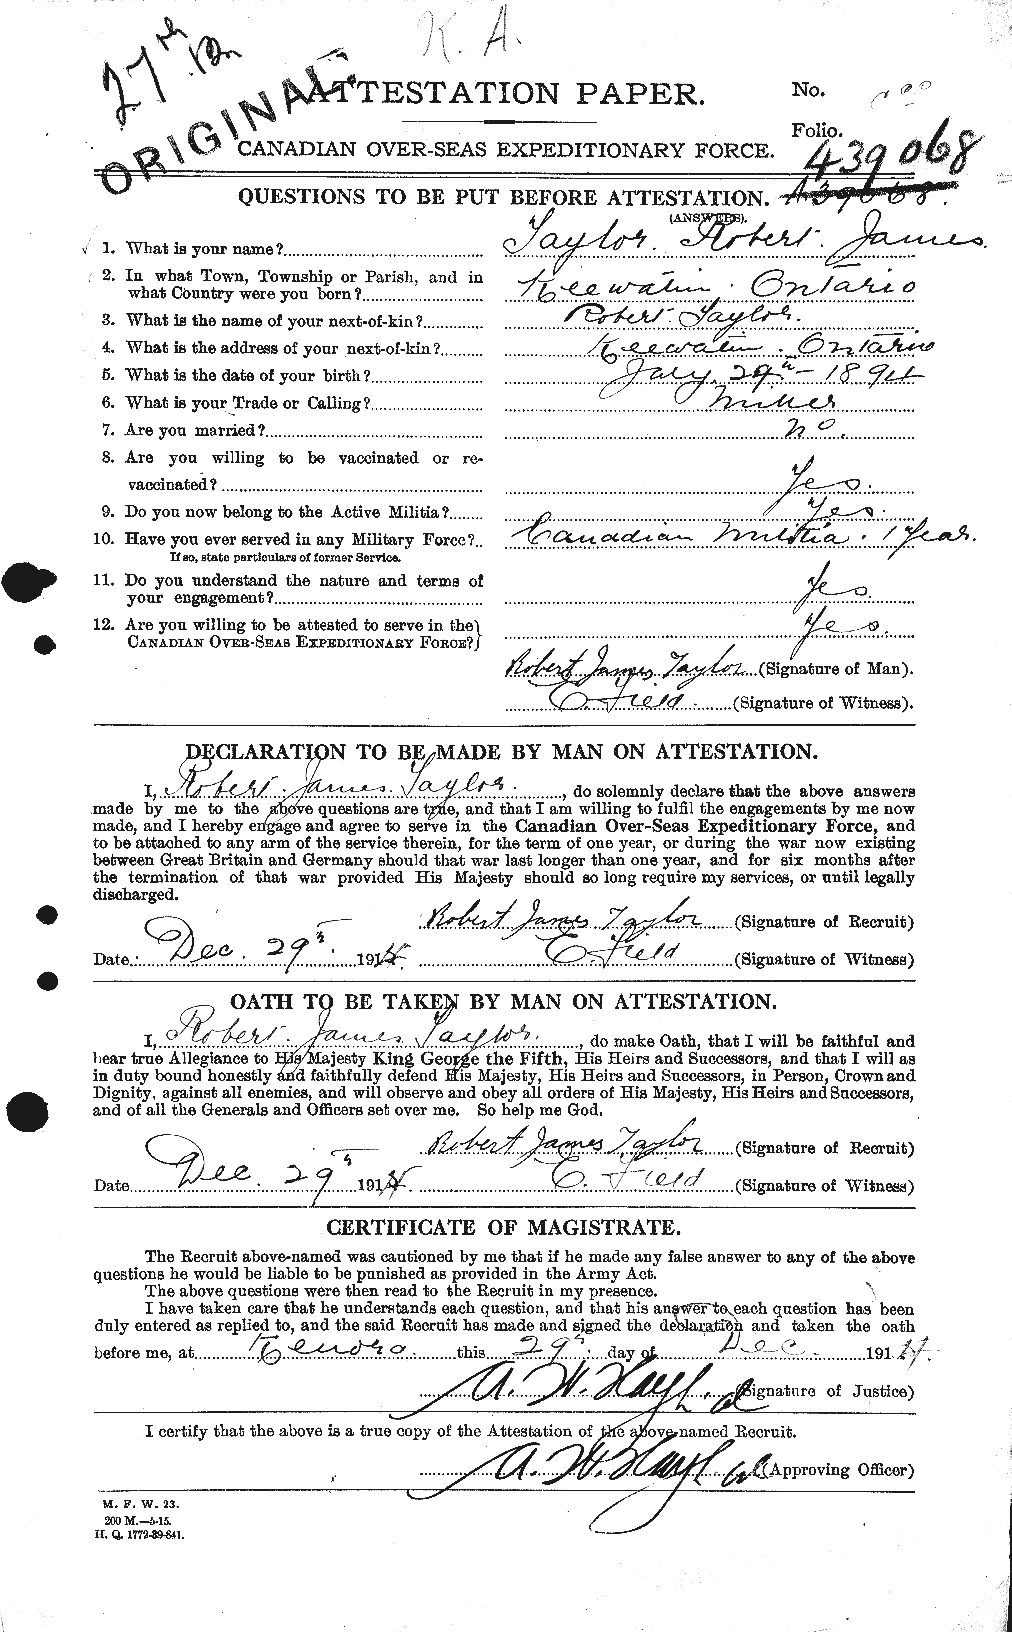 Personnel Records of the First World War - CEF 627487a